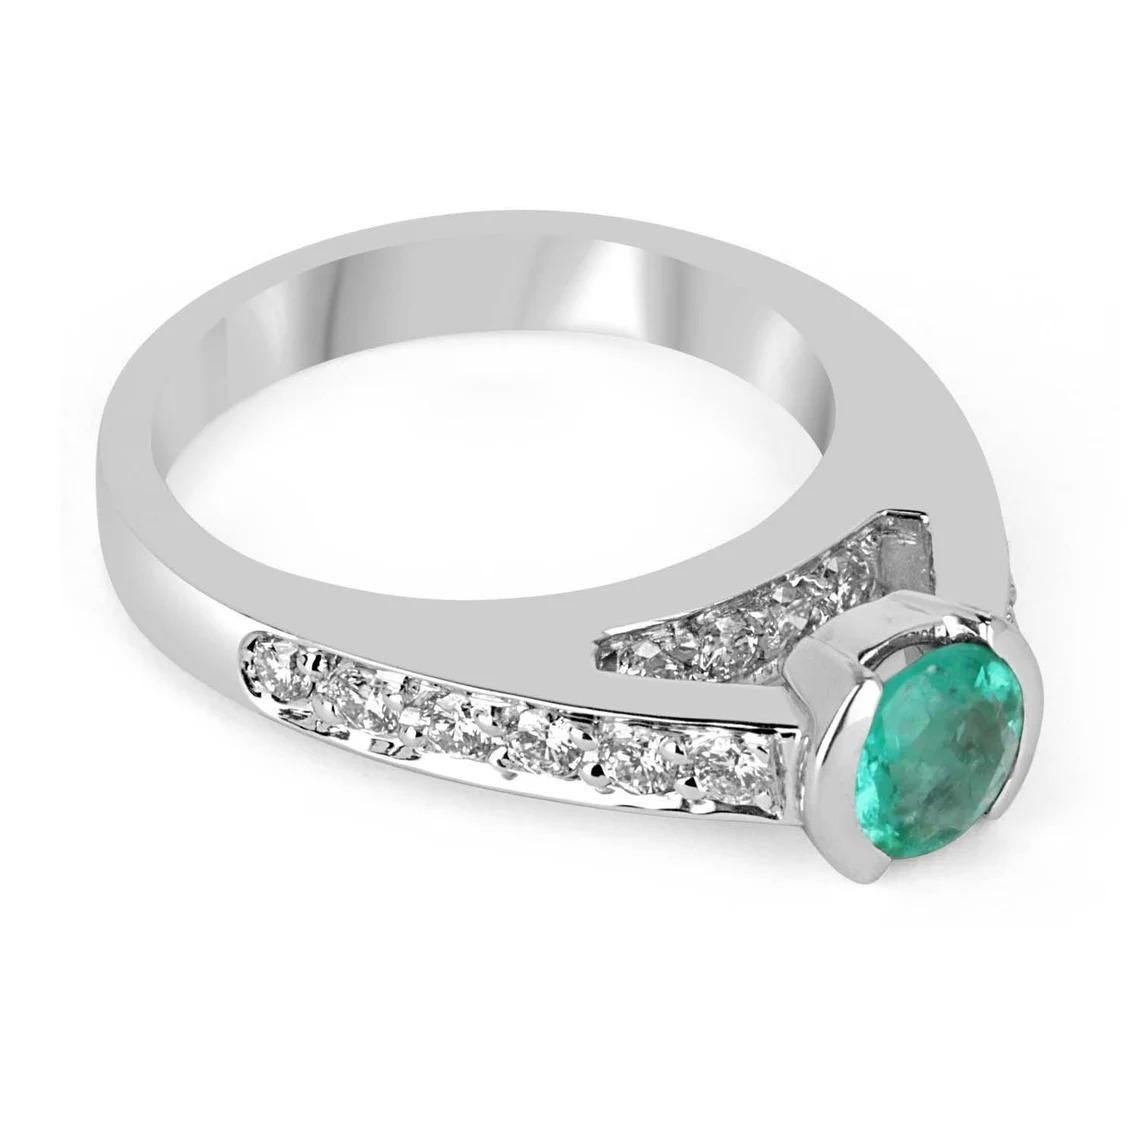 Elegantly displayed is a round shape Colombian emerald and diamond accent engagement ring. The center gem is filled with life and brilliance! Among the emeralds, impressive qualities are its vibrant color and beautiful eye clarity. This gemstone is